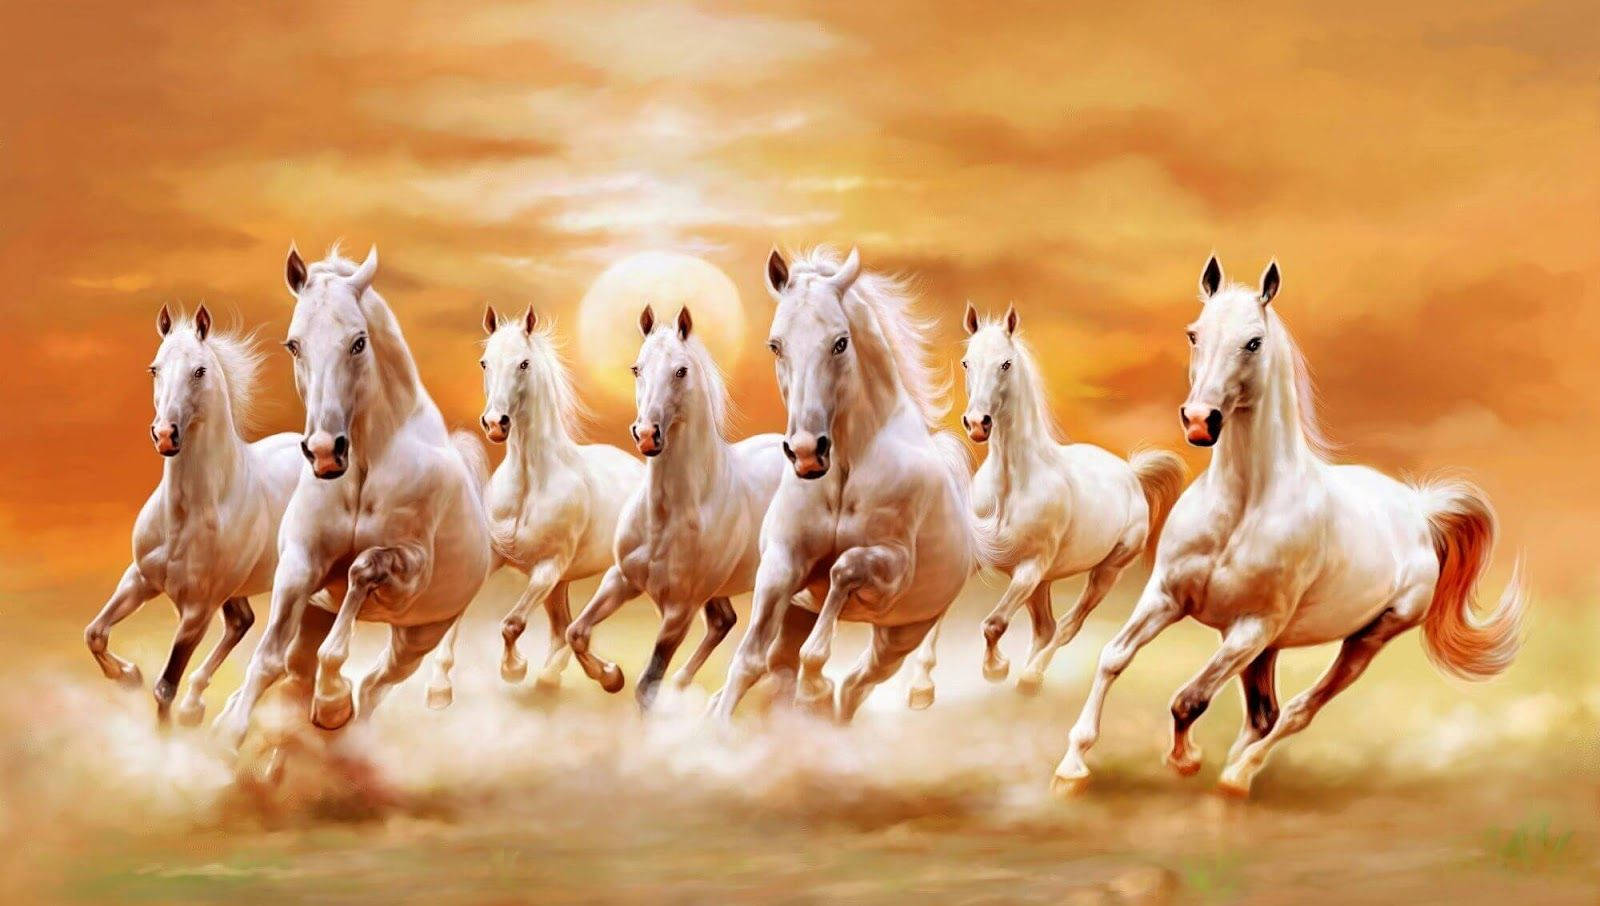 Galloping White Horses During Sunset